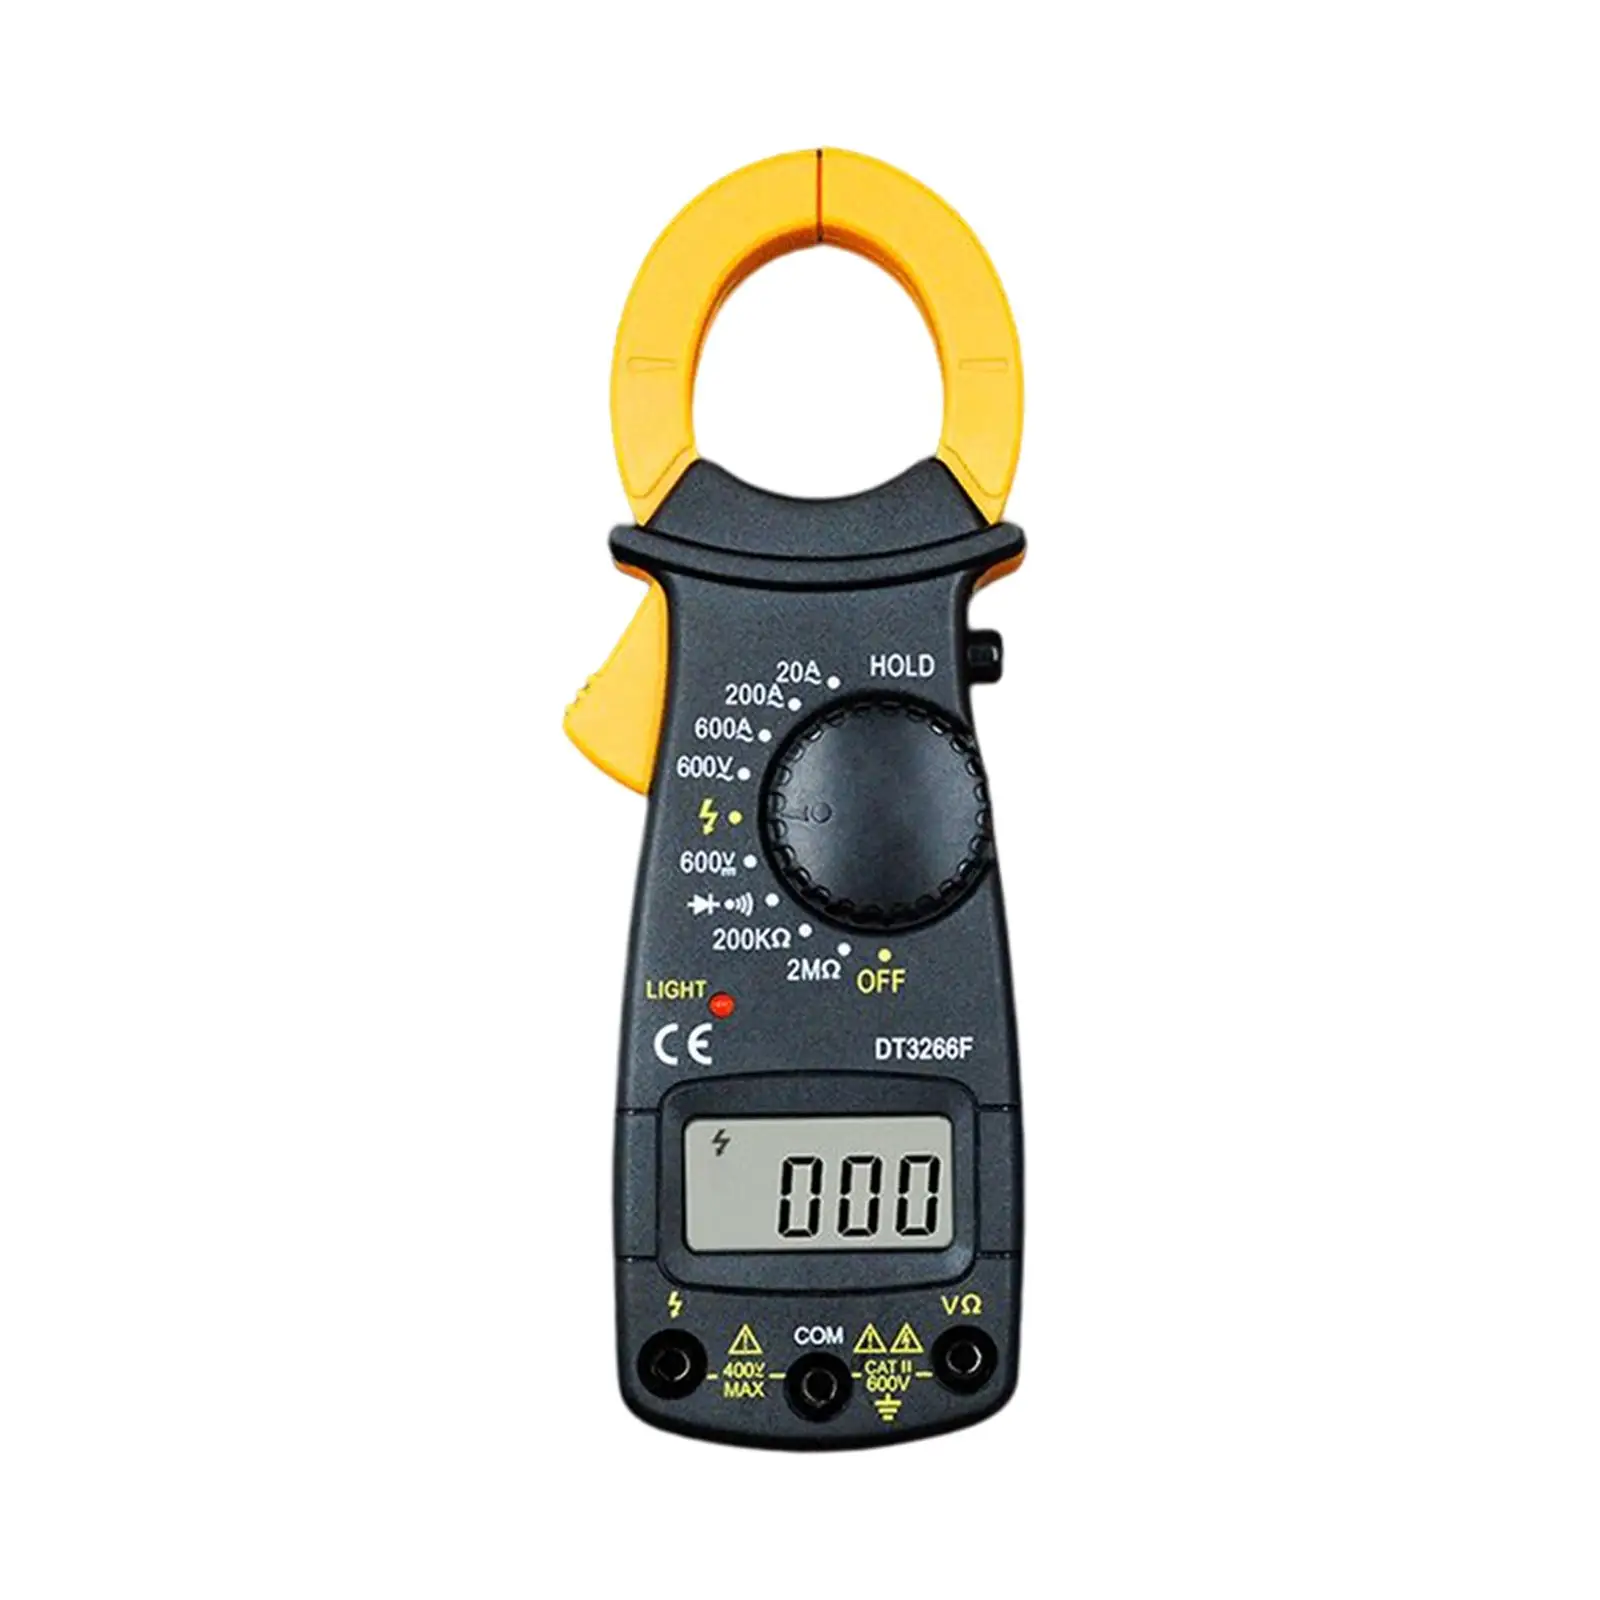 Digital Clamp Meter Multimeter Multifunction 2A/20A/600A AC Current Diode Tester Low Battery Indicator Resistance Voltage Tester